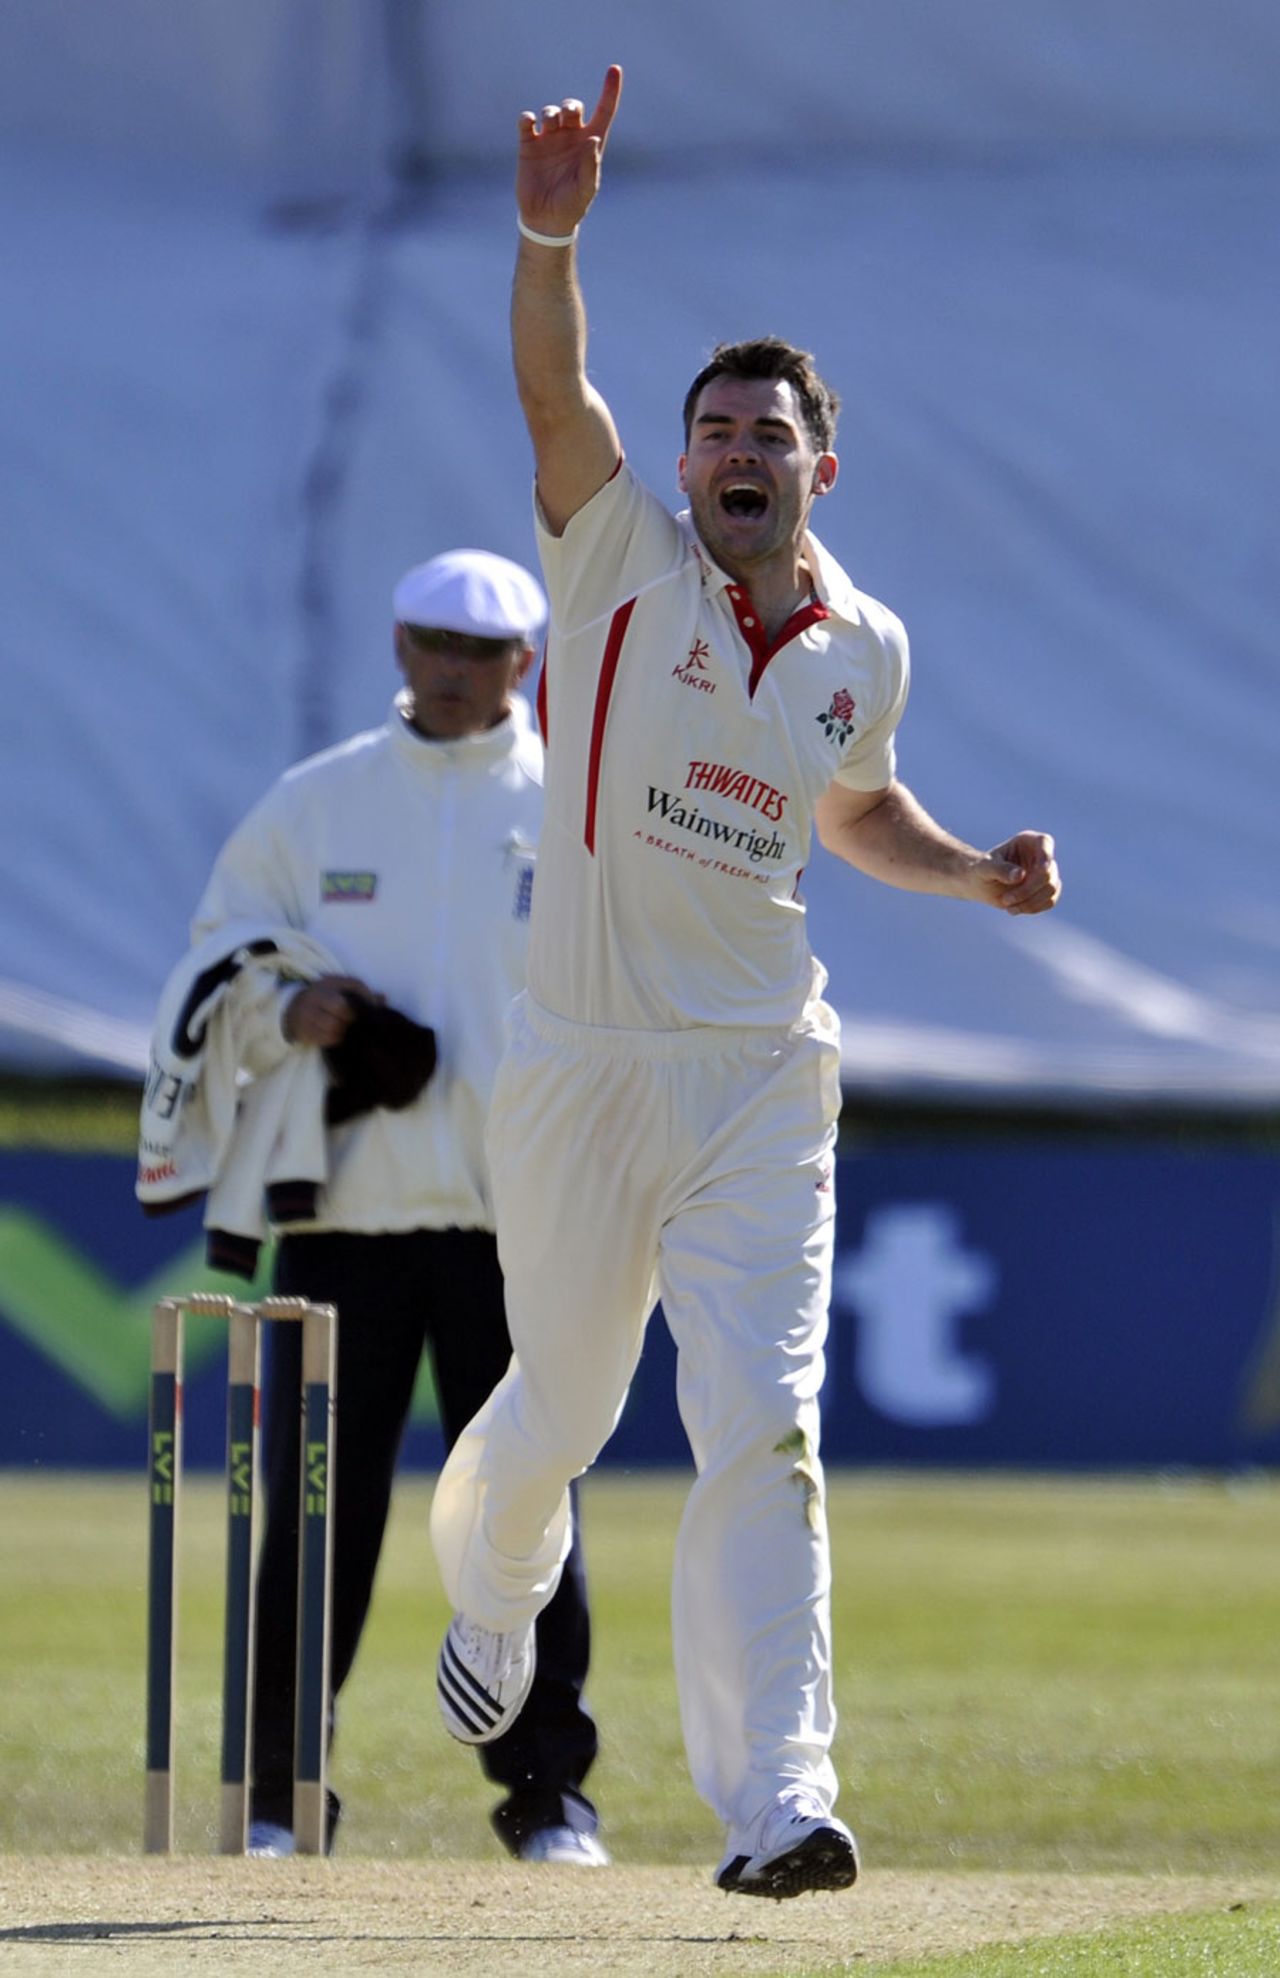 James Anderson celebrates a wicket, Glamorgan v Lancashire, County Championship, Division Two, Colwyn Bay, 1st day, May 1, 2012